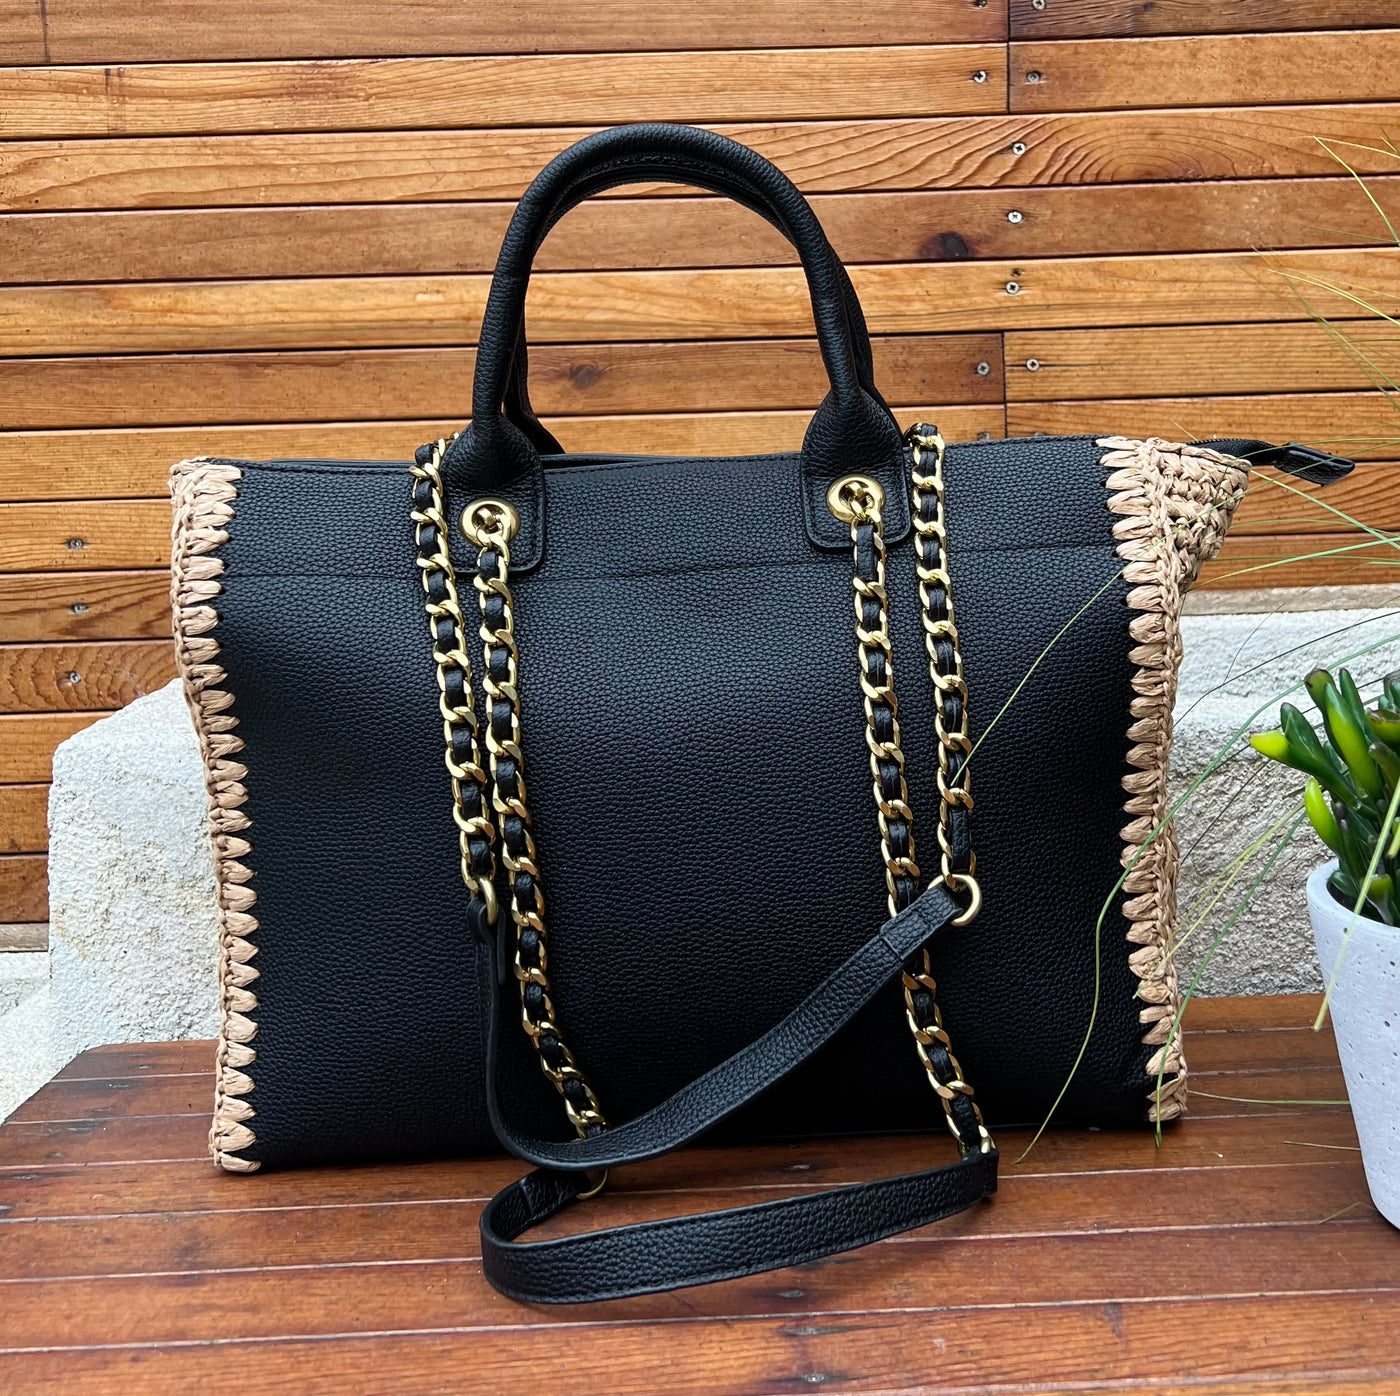 Black Pu Leather Tote Bag With Woven Detail 24025